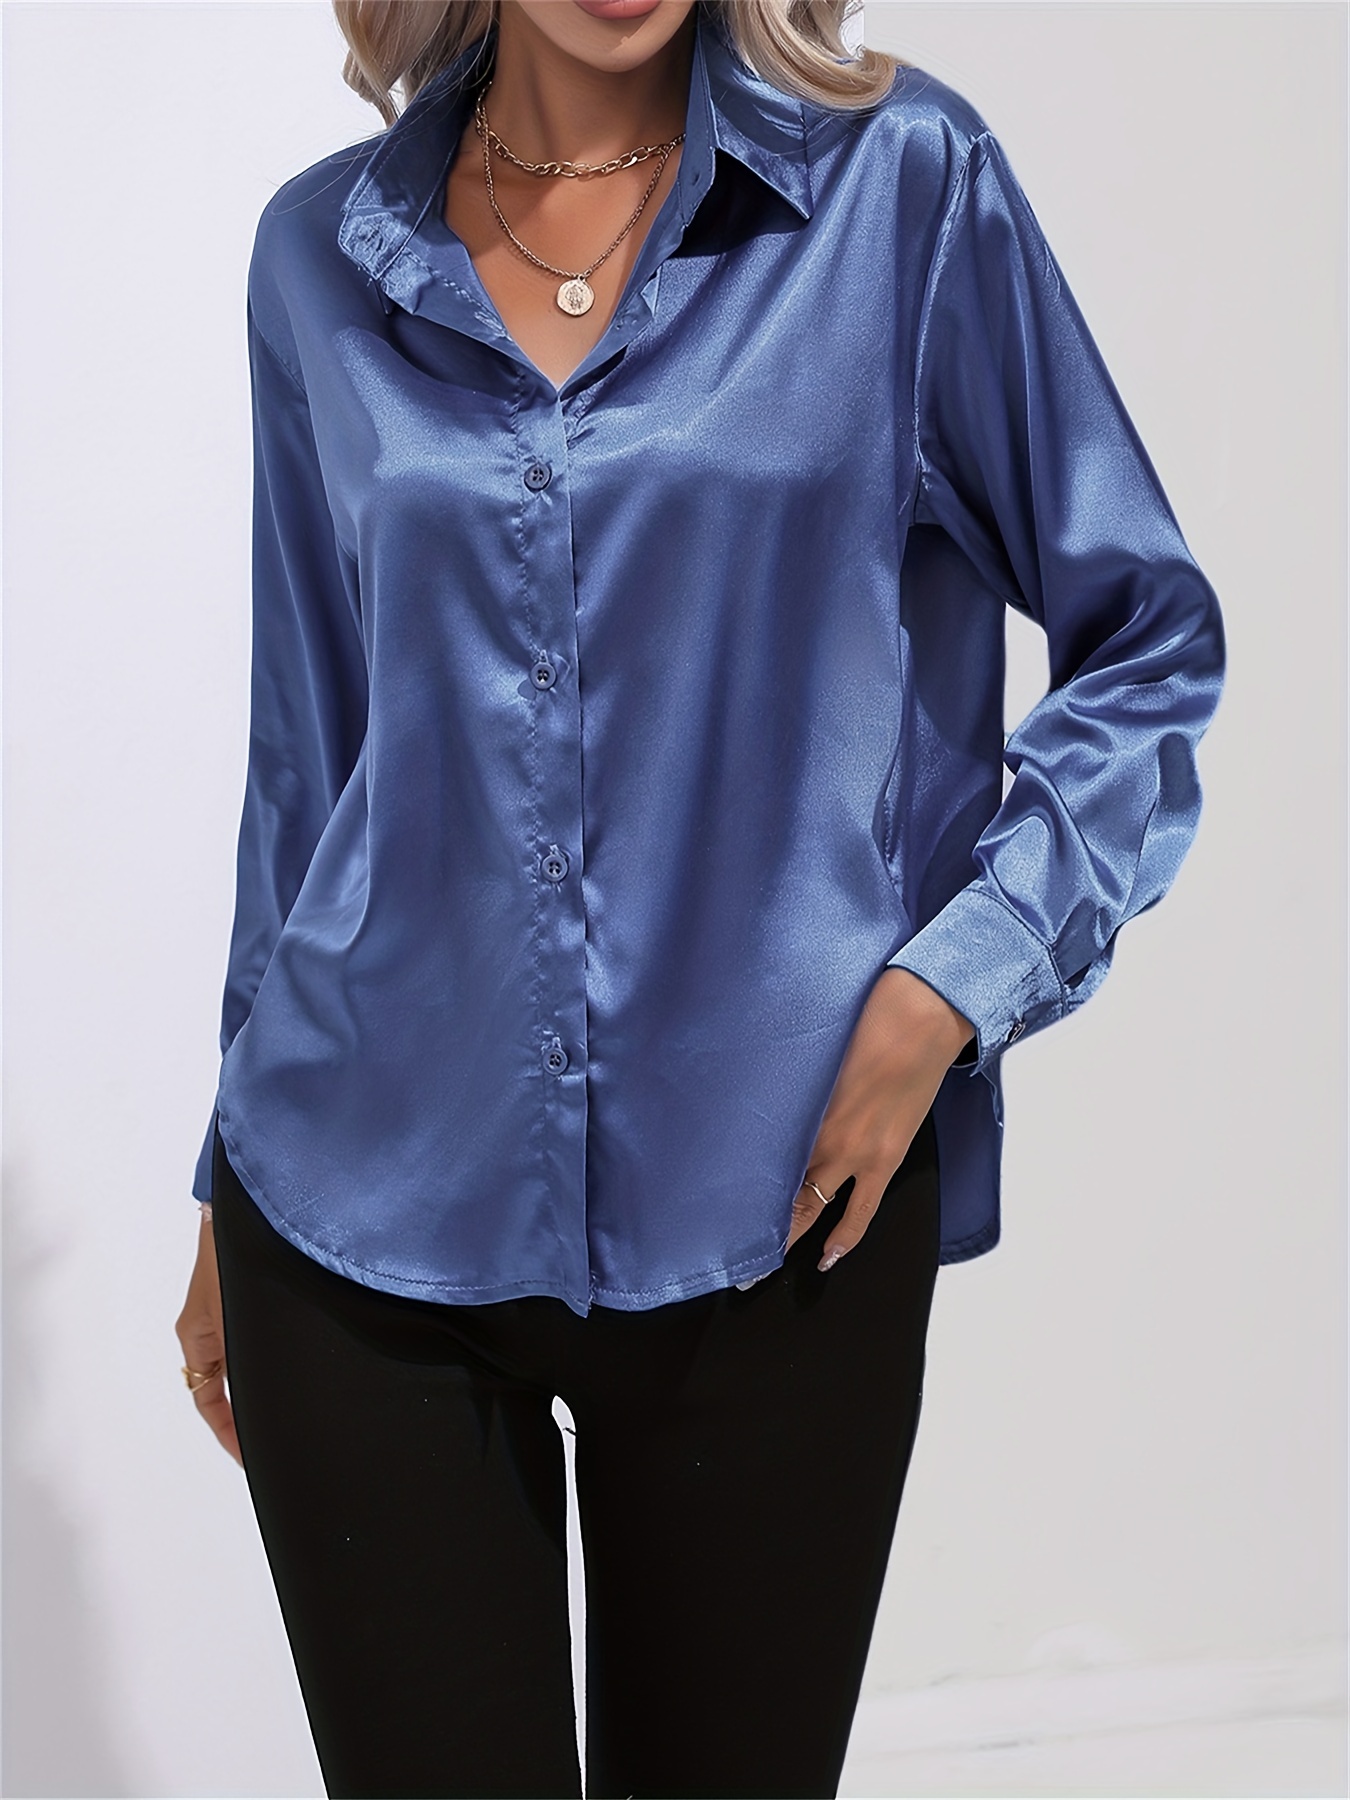 solid smoothly shirt, solid smoothly shirt elegant button front turn down collar long sleeve shirt womens clothing details 90